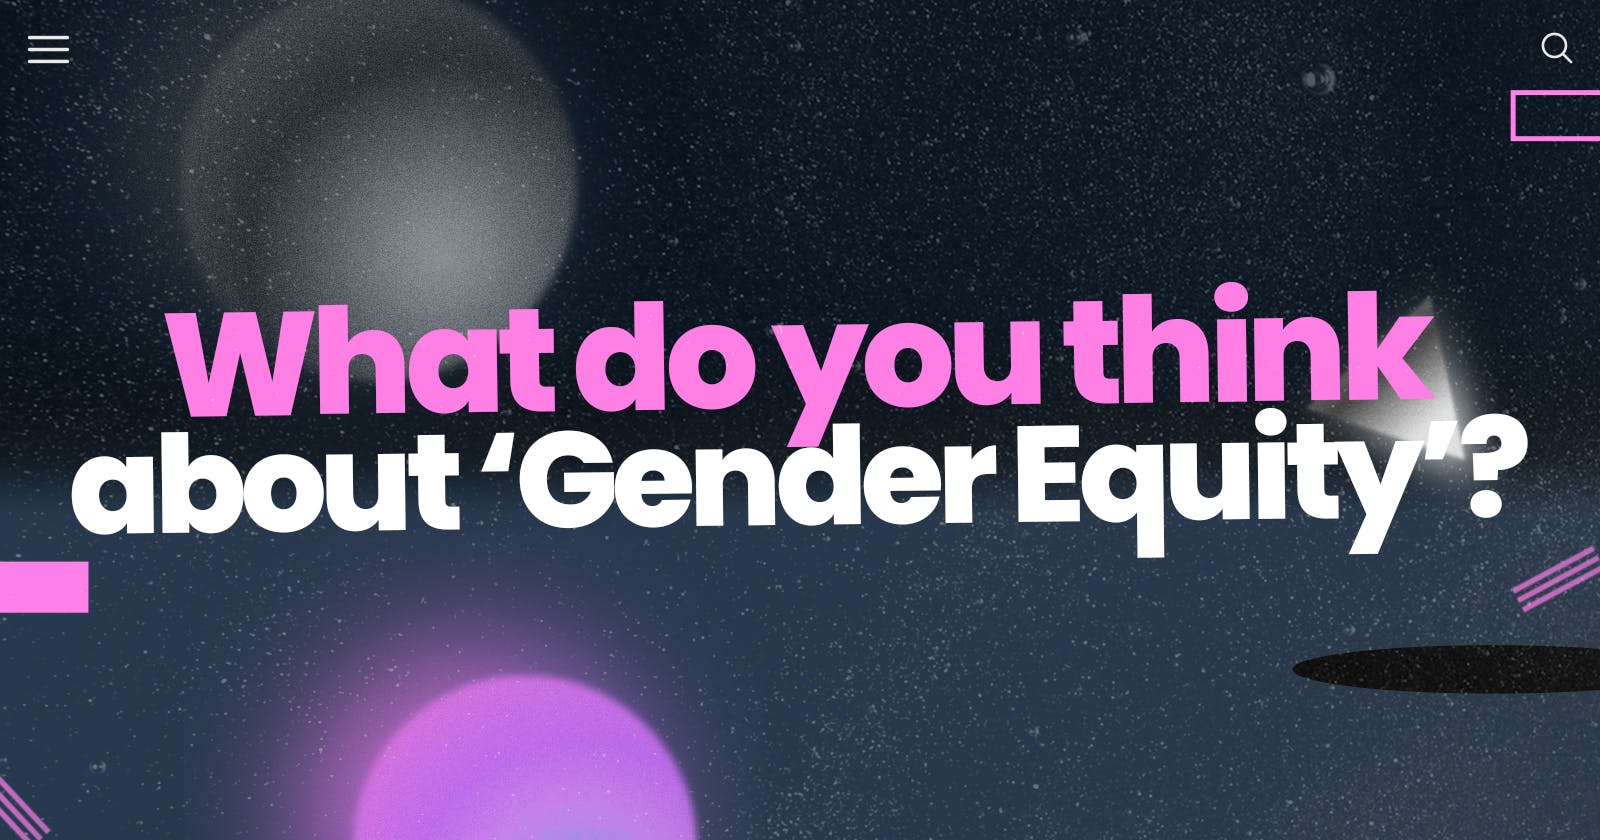 What do you think about ‘Gender Equity’?